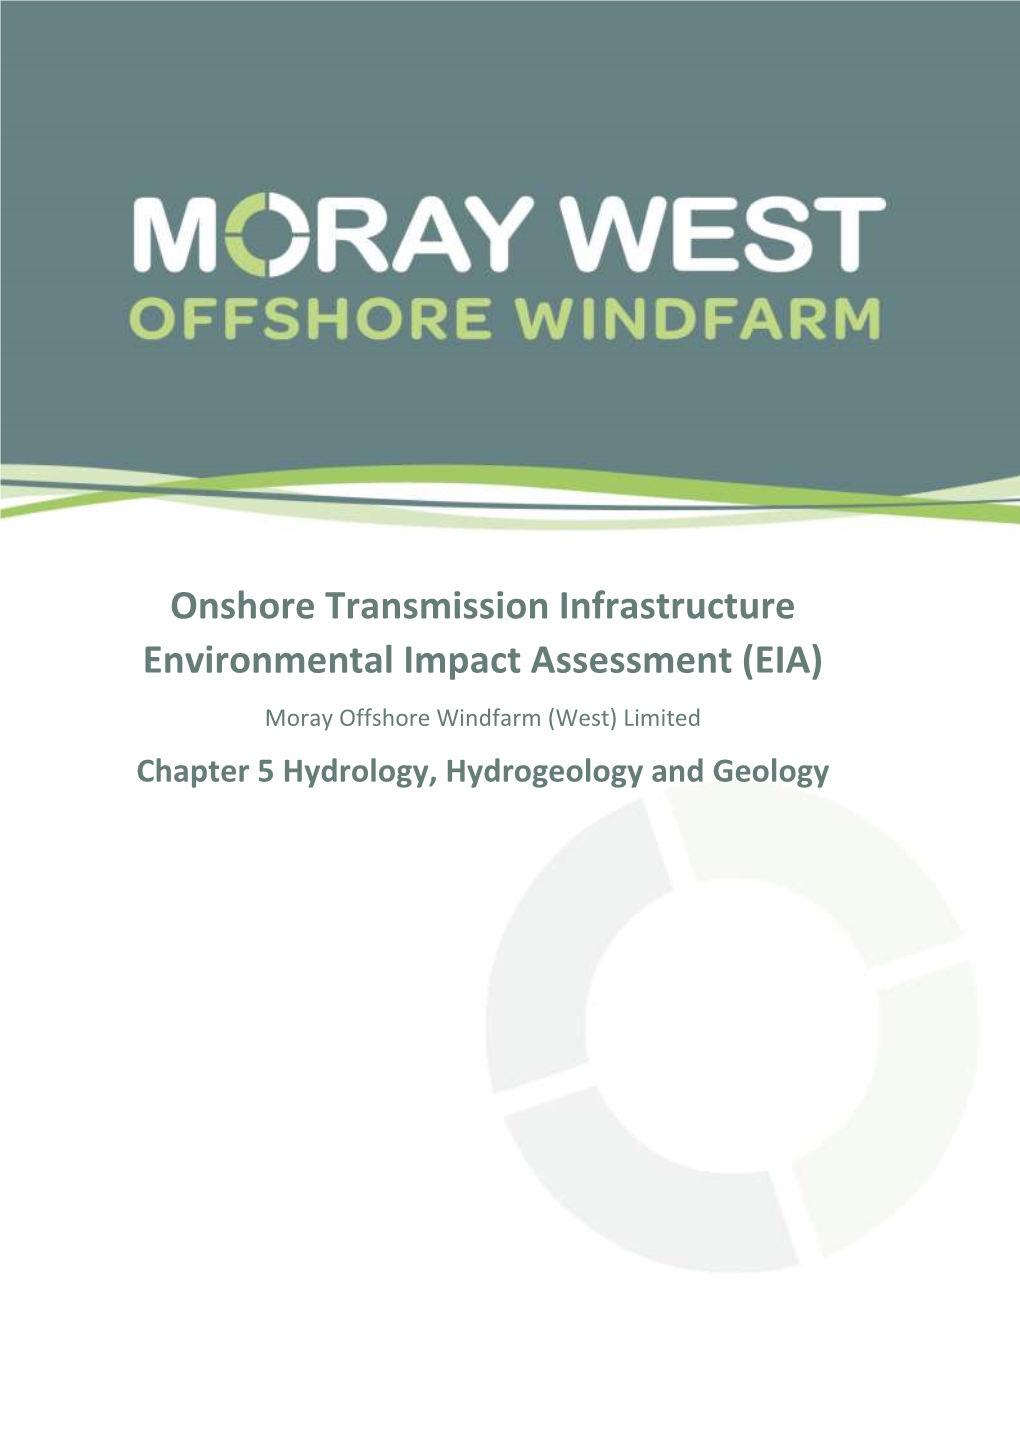 Onshore Transmission Infrastructure Environmental Impact Assessment (EIA) Moray Offshore Windfarm (West) Limited Chapter 5 Hydrology, Hydrogeology and Geology